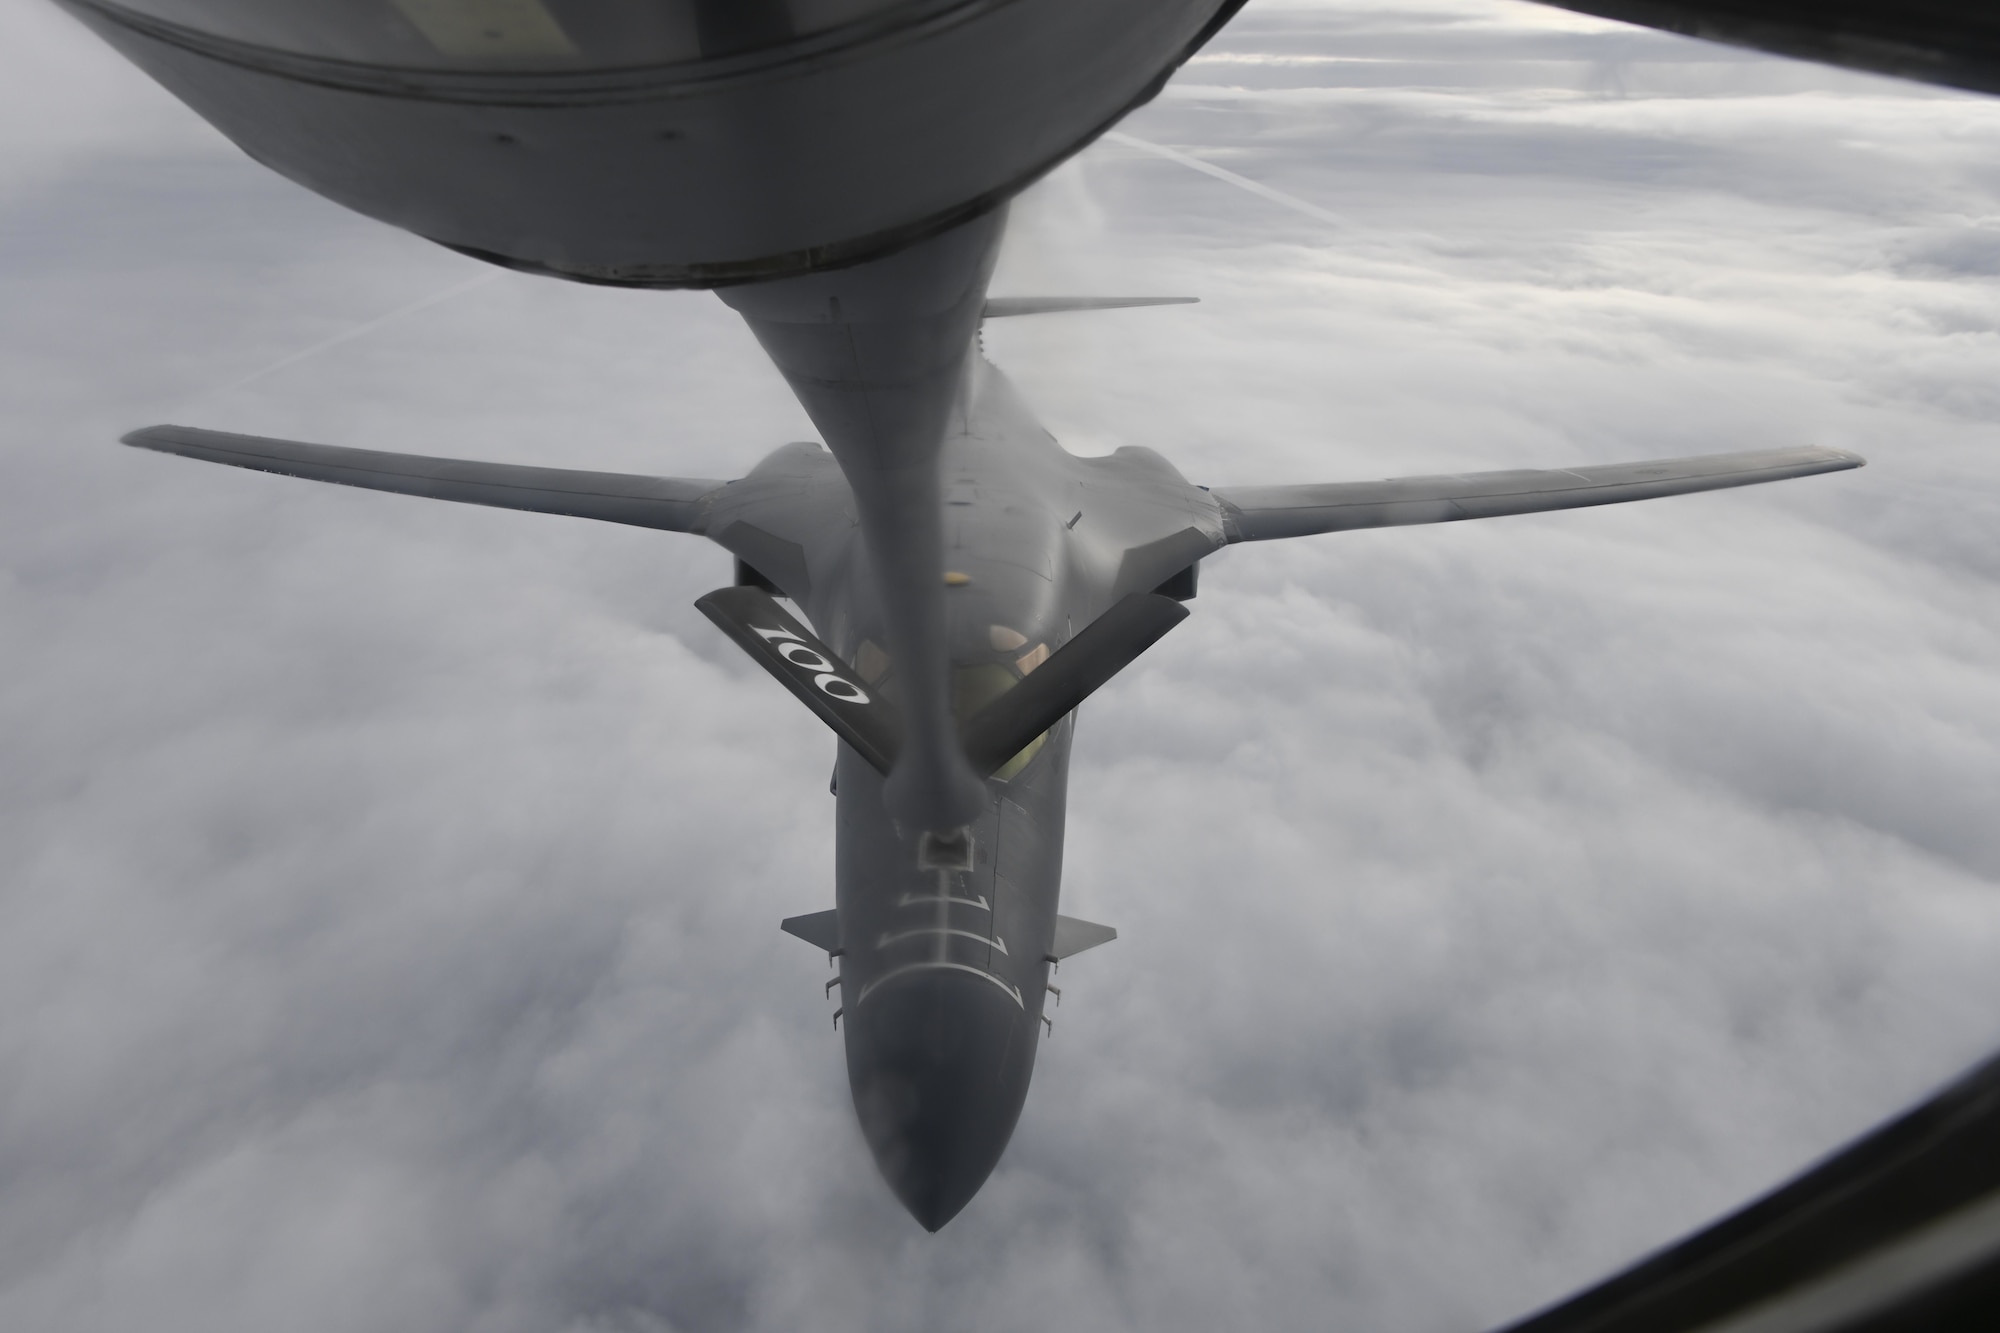 A 9th Expeditionary Bomb Squadron B-1B Lancer, deployed in support of Bomber Task Force Europe 22-1, receives fuel from a 100th Air Refueling Wing KC-135 Stratotanker enroute to a Black Sea maritime targeting training mission, Oct. 19, 2021. The Bomber Task Force Europe mission series requires a joint and coalition force to support strategic bomber deployments within the European theater, which amplifies readiness and promotes interoperability between rotational bomber aircrew, NATO allies, and coalition partners.